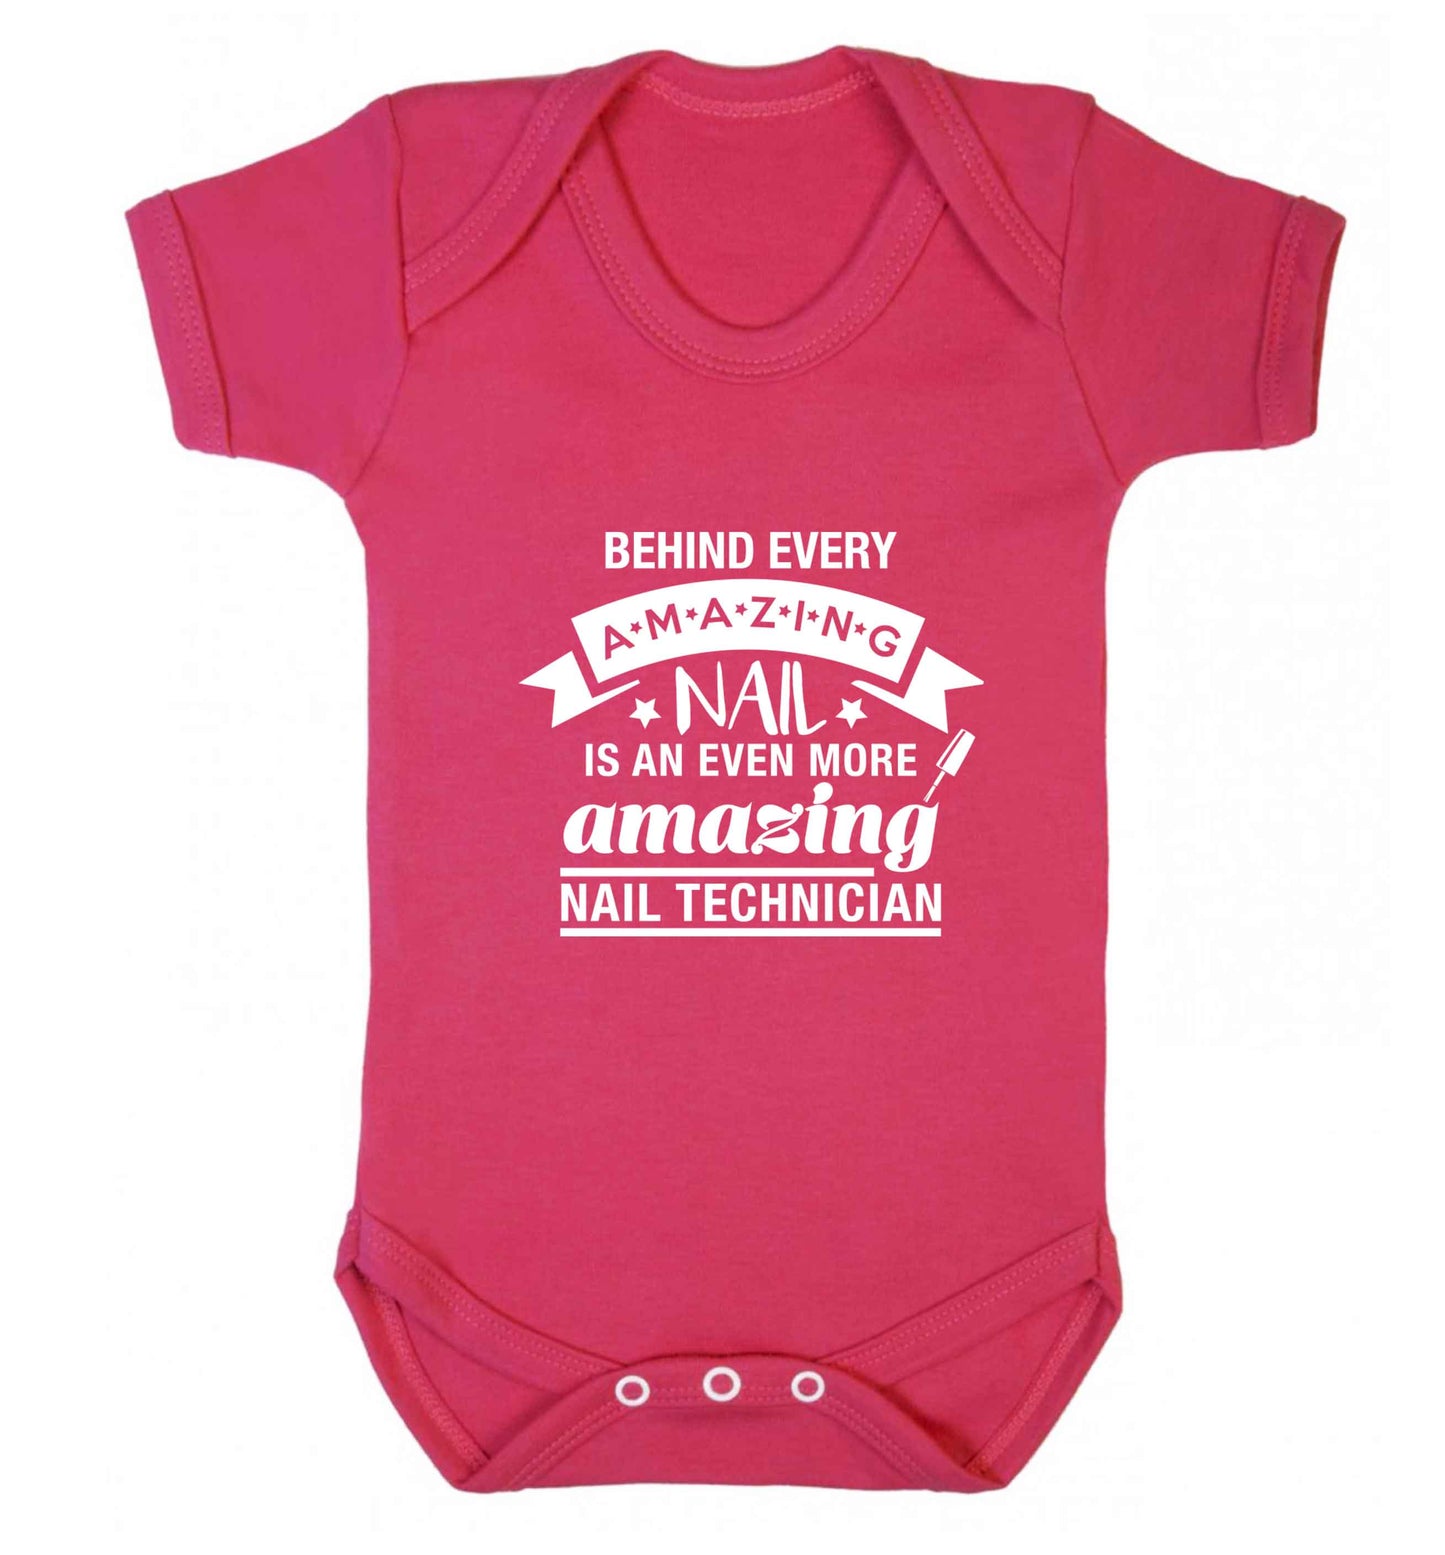 Behind every amazing nail is an even more amazing nail technician baby vest dark pink 18-24 months